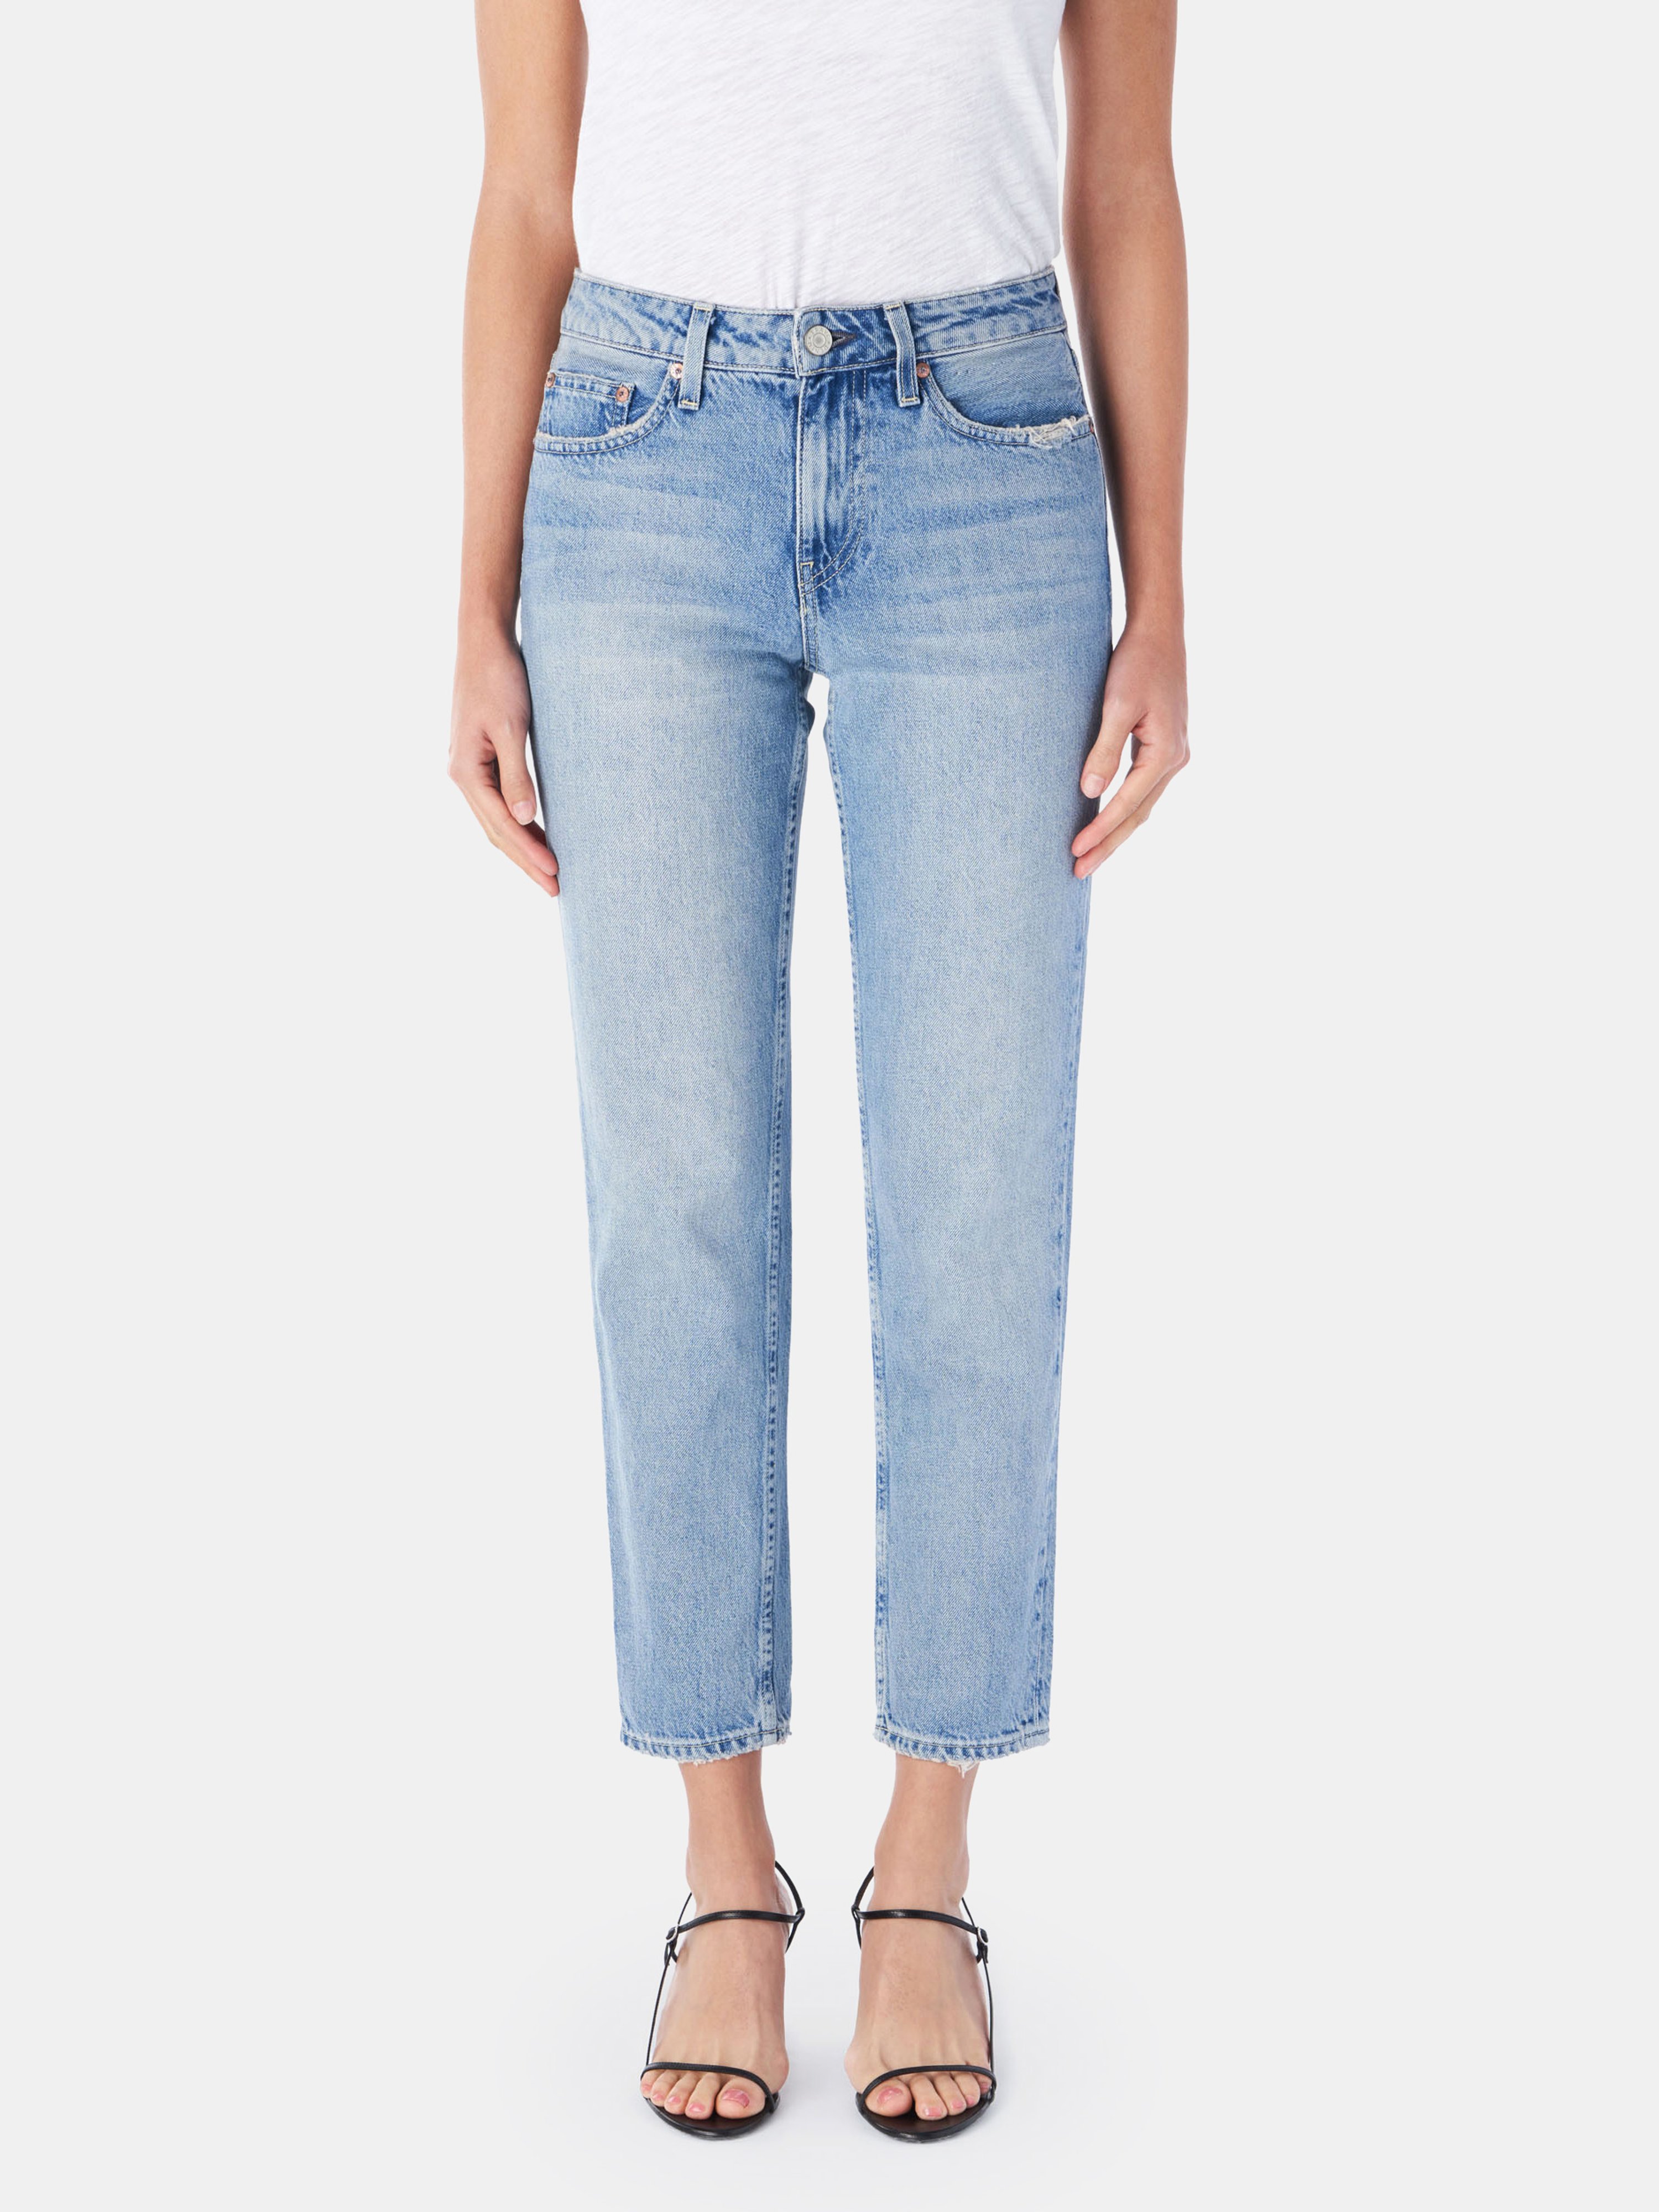 TRAVE TRAVE KAROLINA RELAXED TAPER JEANS